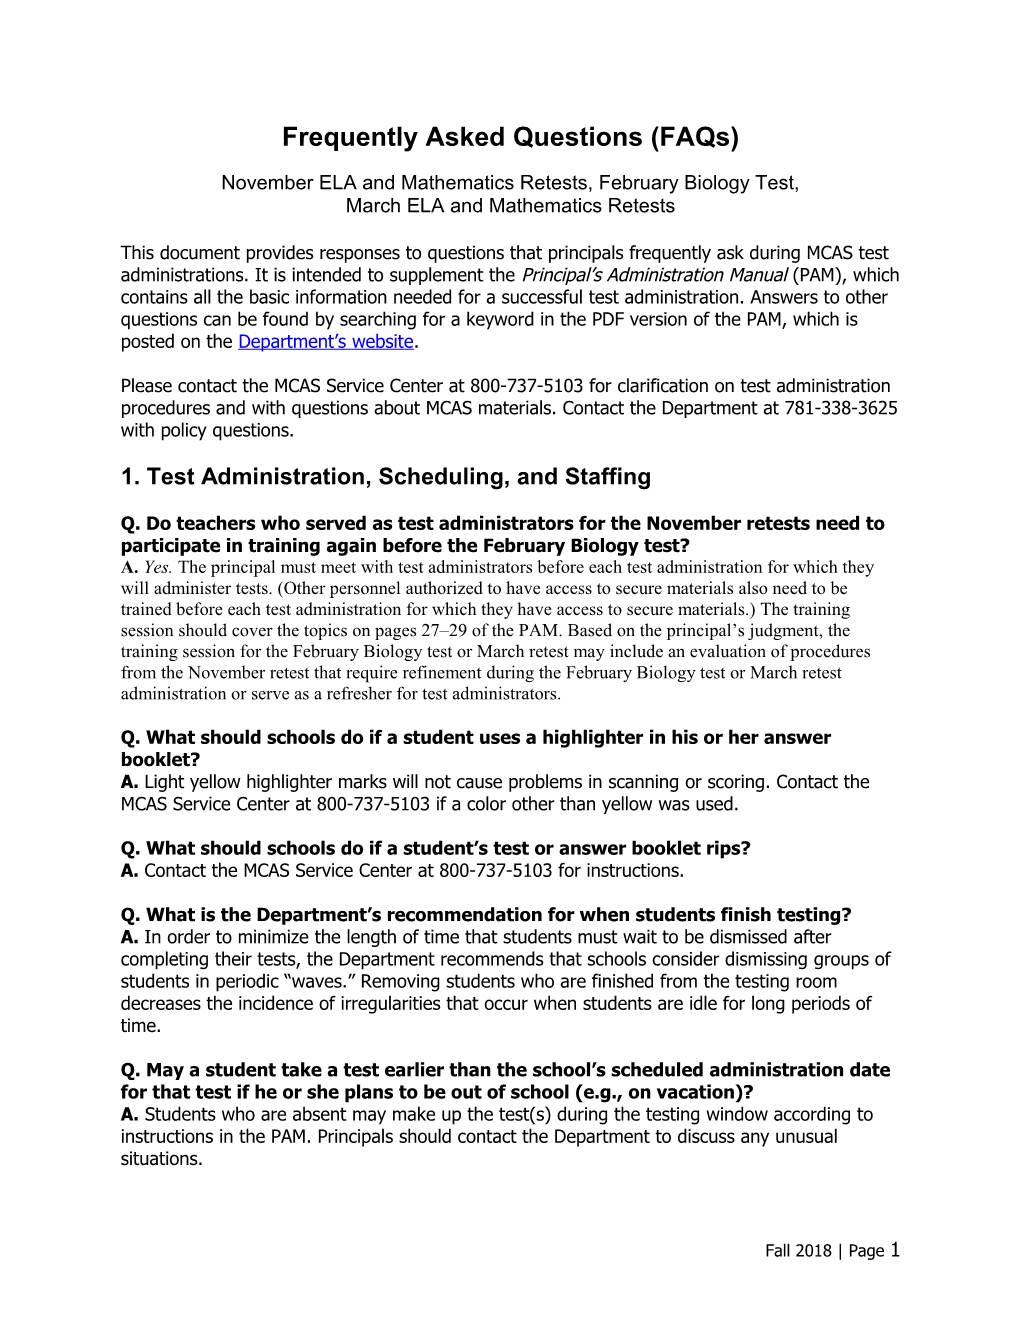 MCAS Fall Winter 2018-2019 Administration Frequently Asked Questions